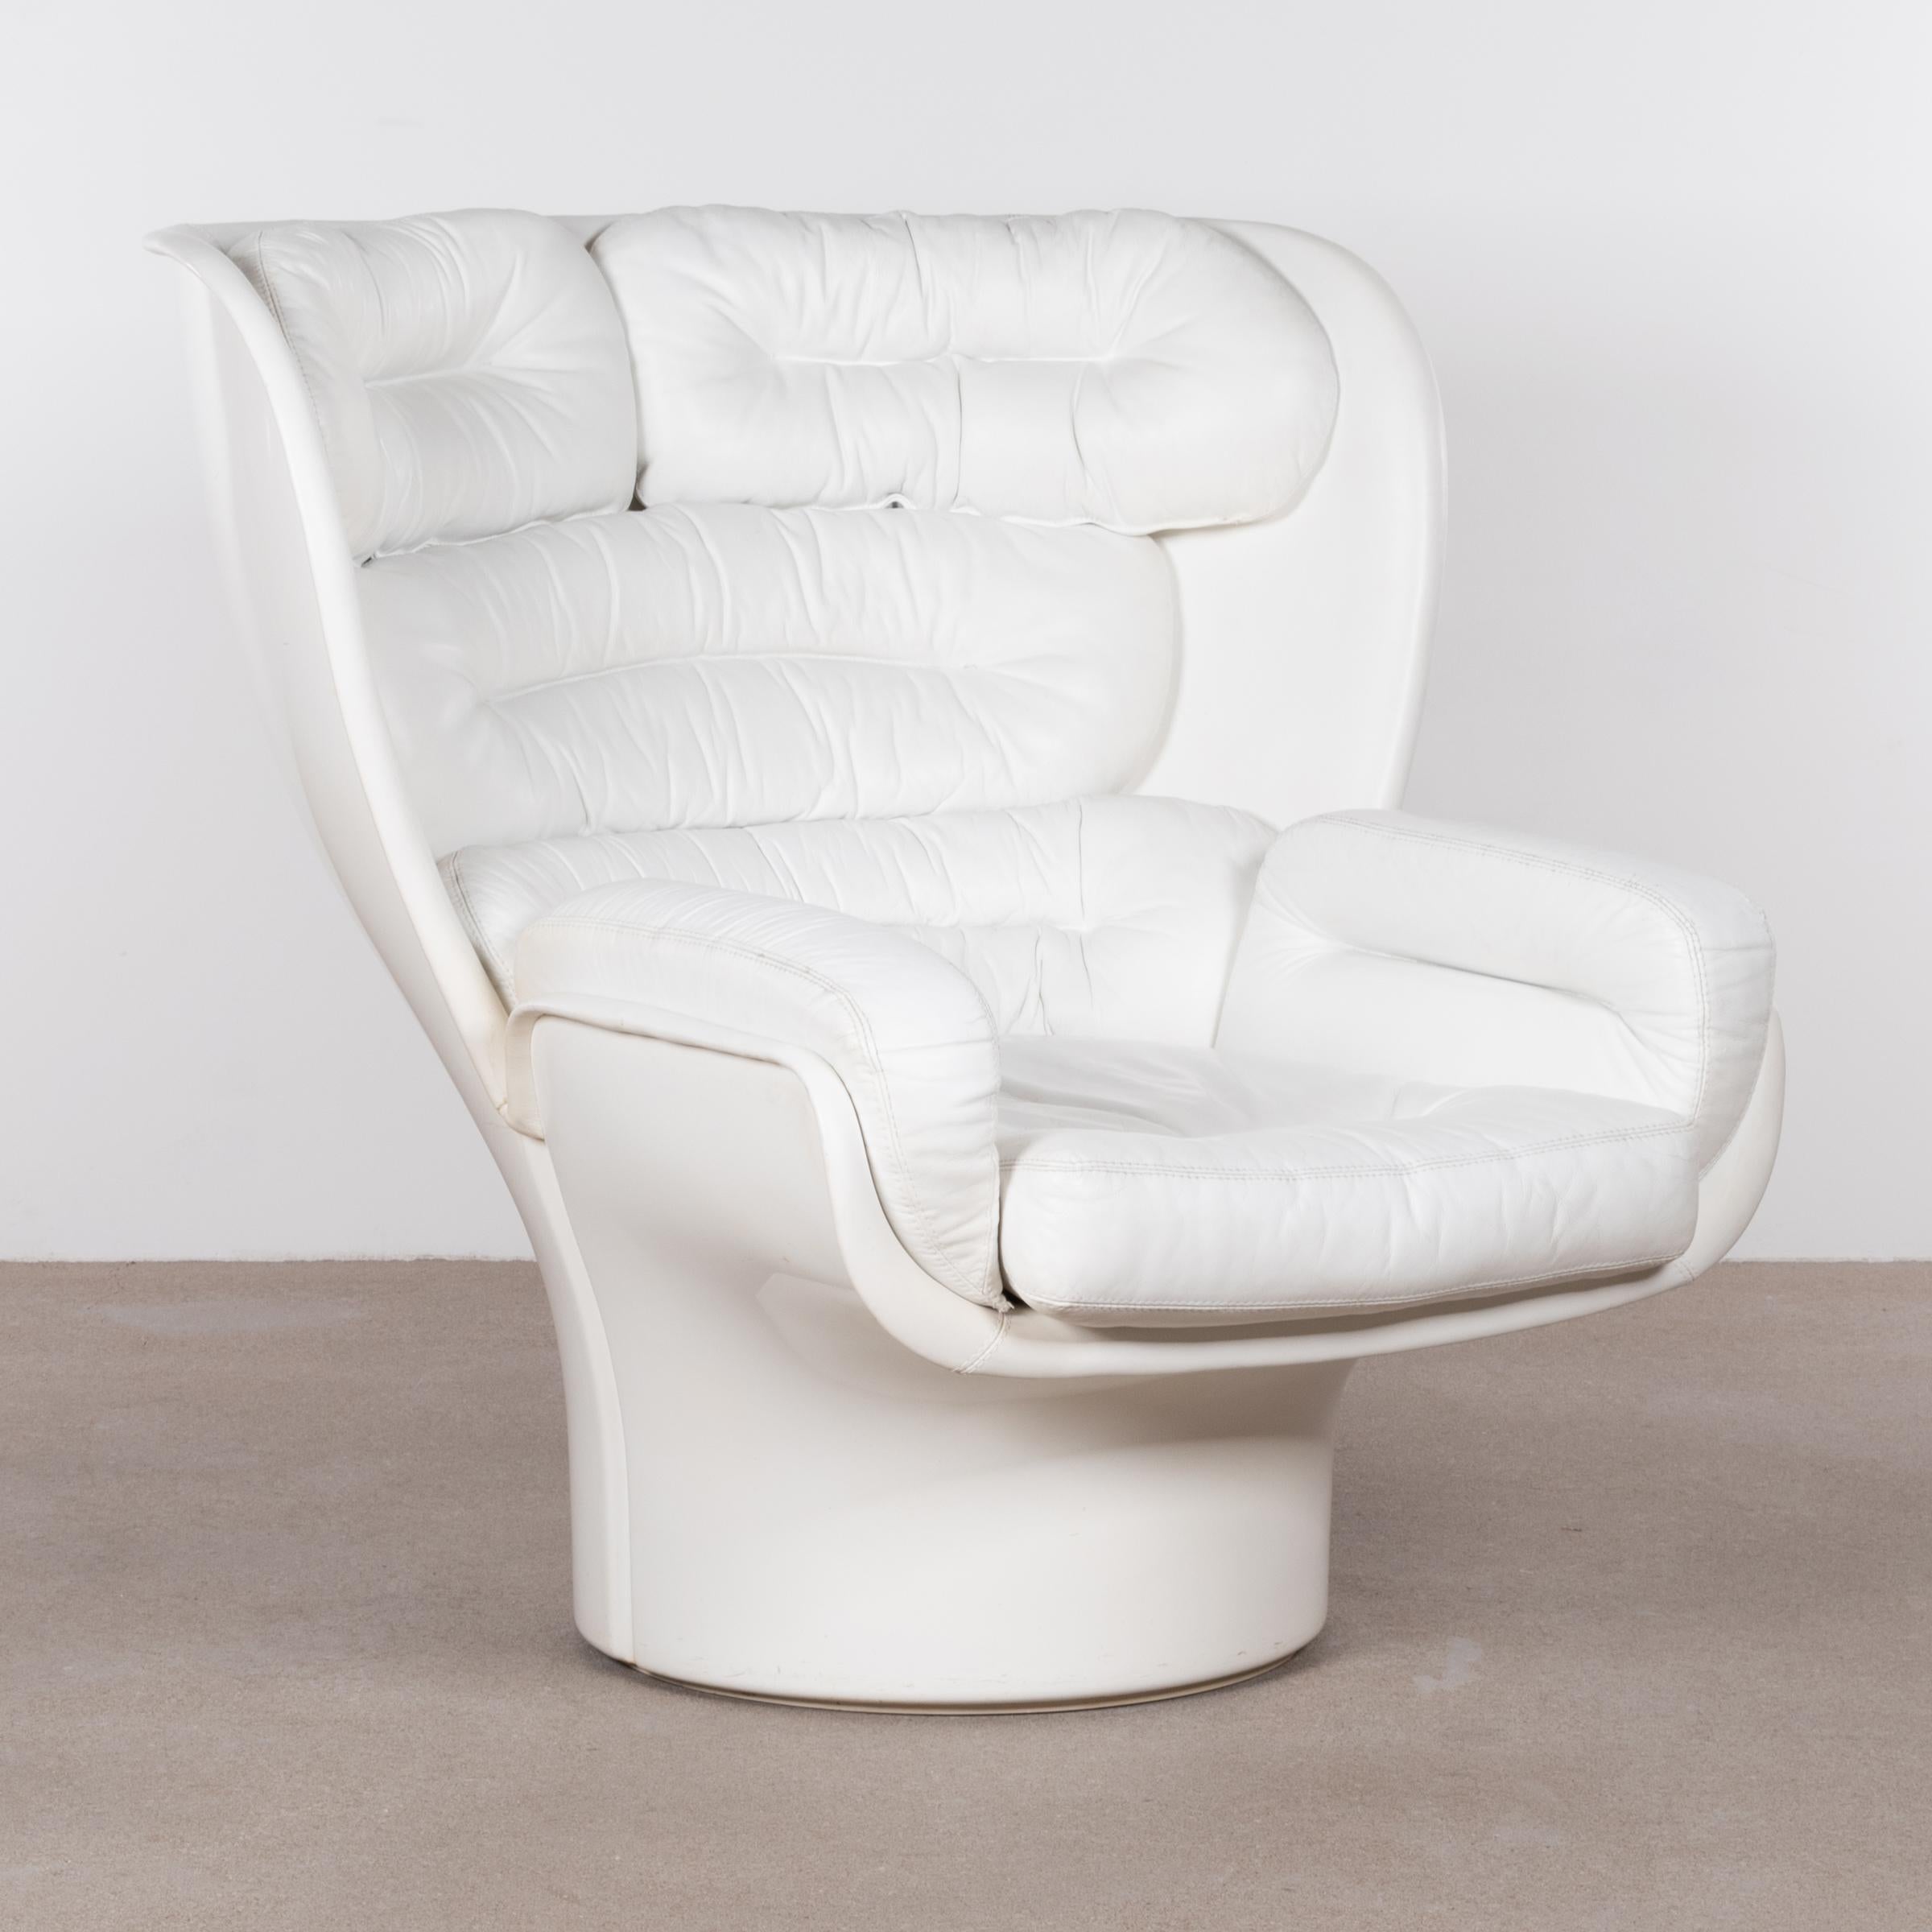 Mid-20th Century Elda Lounge Chair in White Leather by Joe Colombo